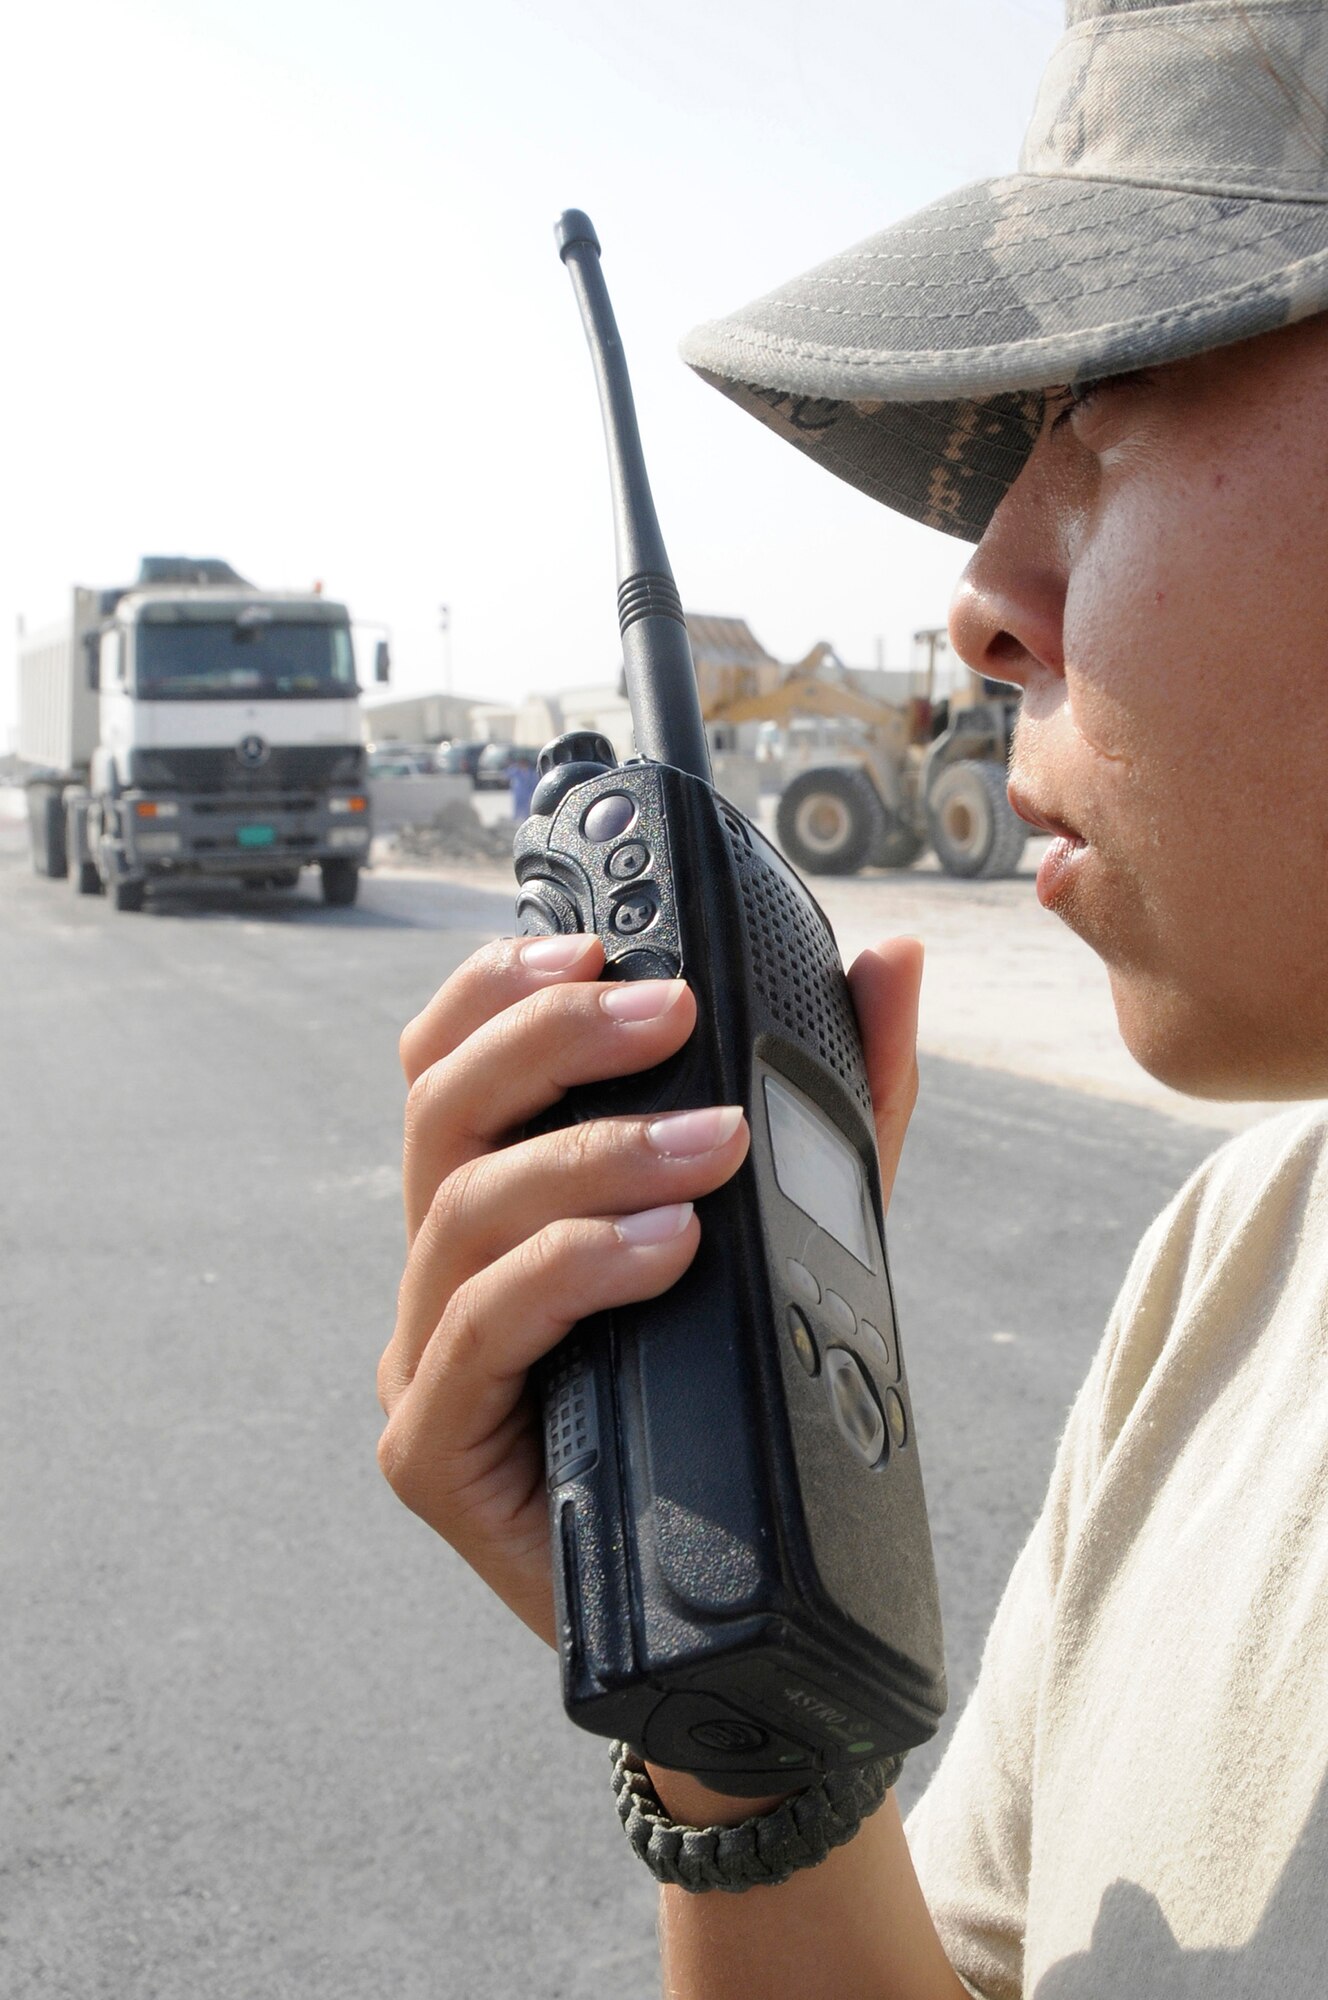 Senior Airman Brenna Reynolds, escort assigned to the 379th Expeditionary Civil Engineer Squadron, uses her radio to call in for accountability Nov. 13, at an undisclosed air base in Southwest Asia. The 379 ECES escort members stay vigilant to ensure third country national contractors here complete their jobs and don?t perform any acts that would endanger deployed members. Airman Reynolds, a native of Van Horn, Texas, is deployed from Shaw Air Force Base, S.C., in support of Operations Iraqi and Enduring Freedom and Joint Task Force-Horn of Africa. (U.S. Air Force photo by Staff Sgt. Darnell T. Cannady/Released)